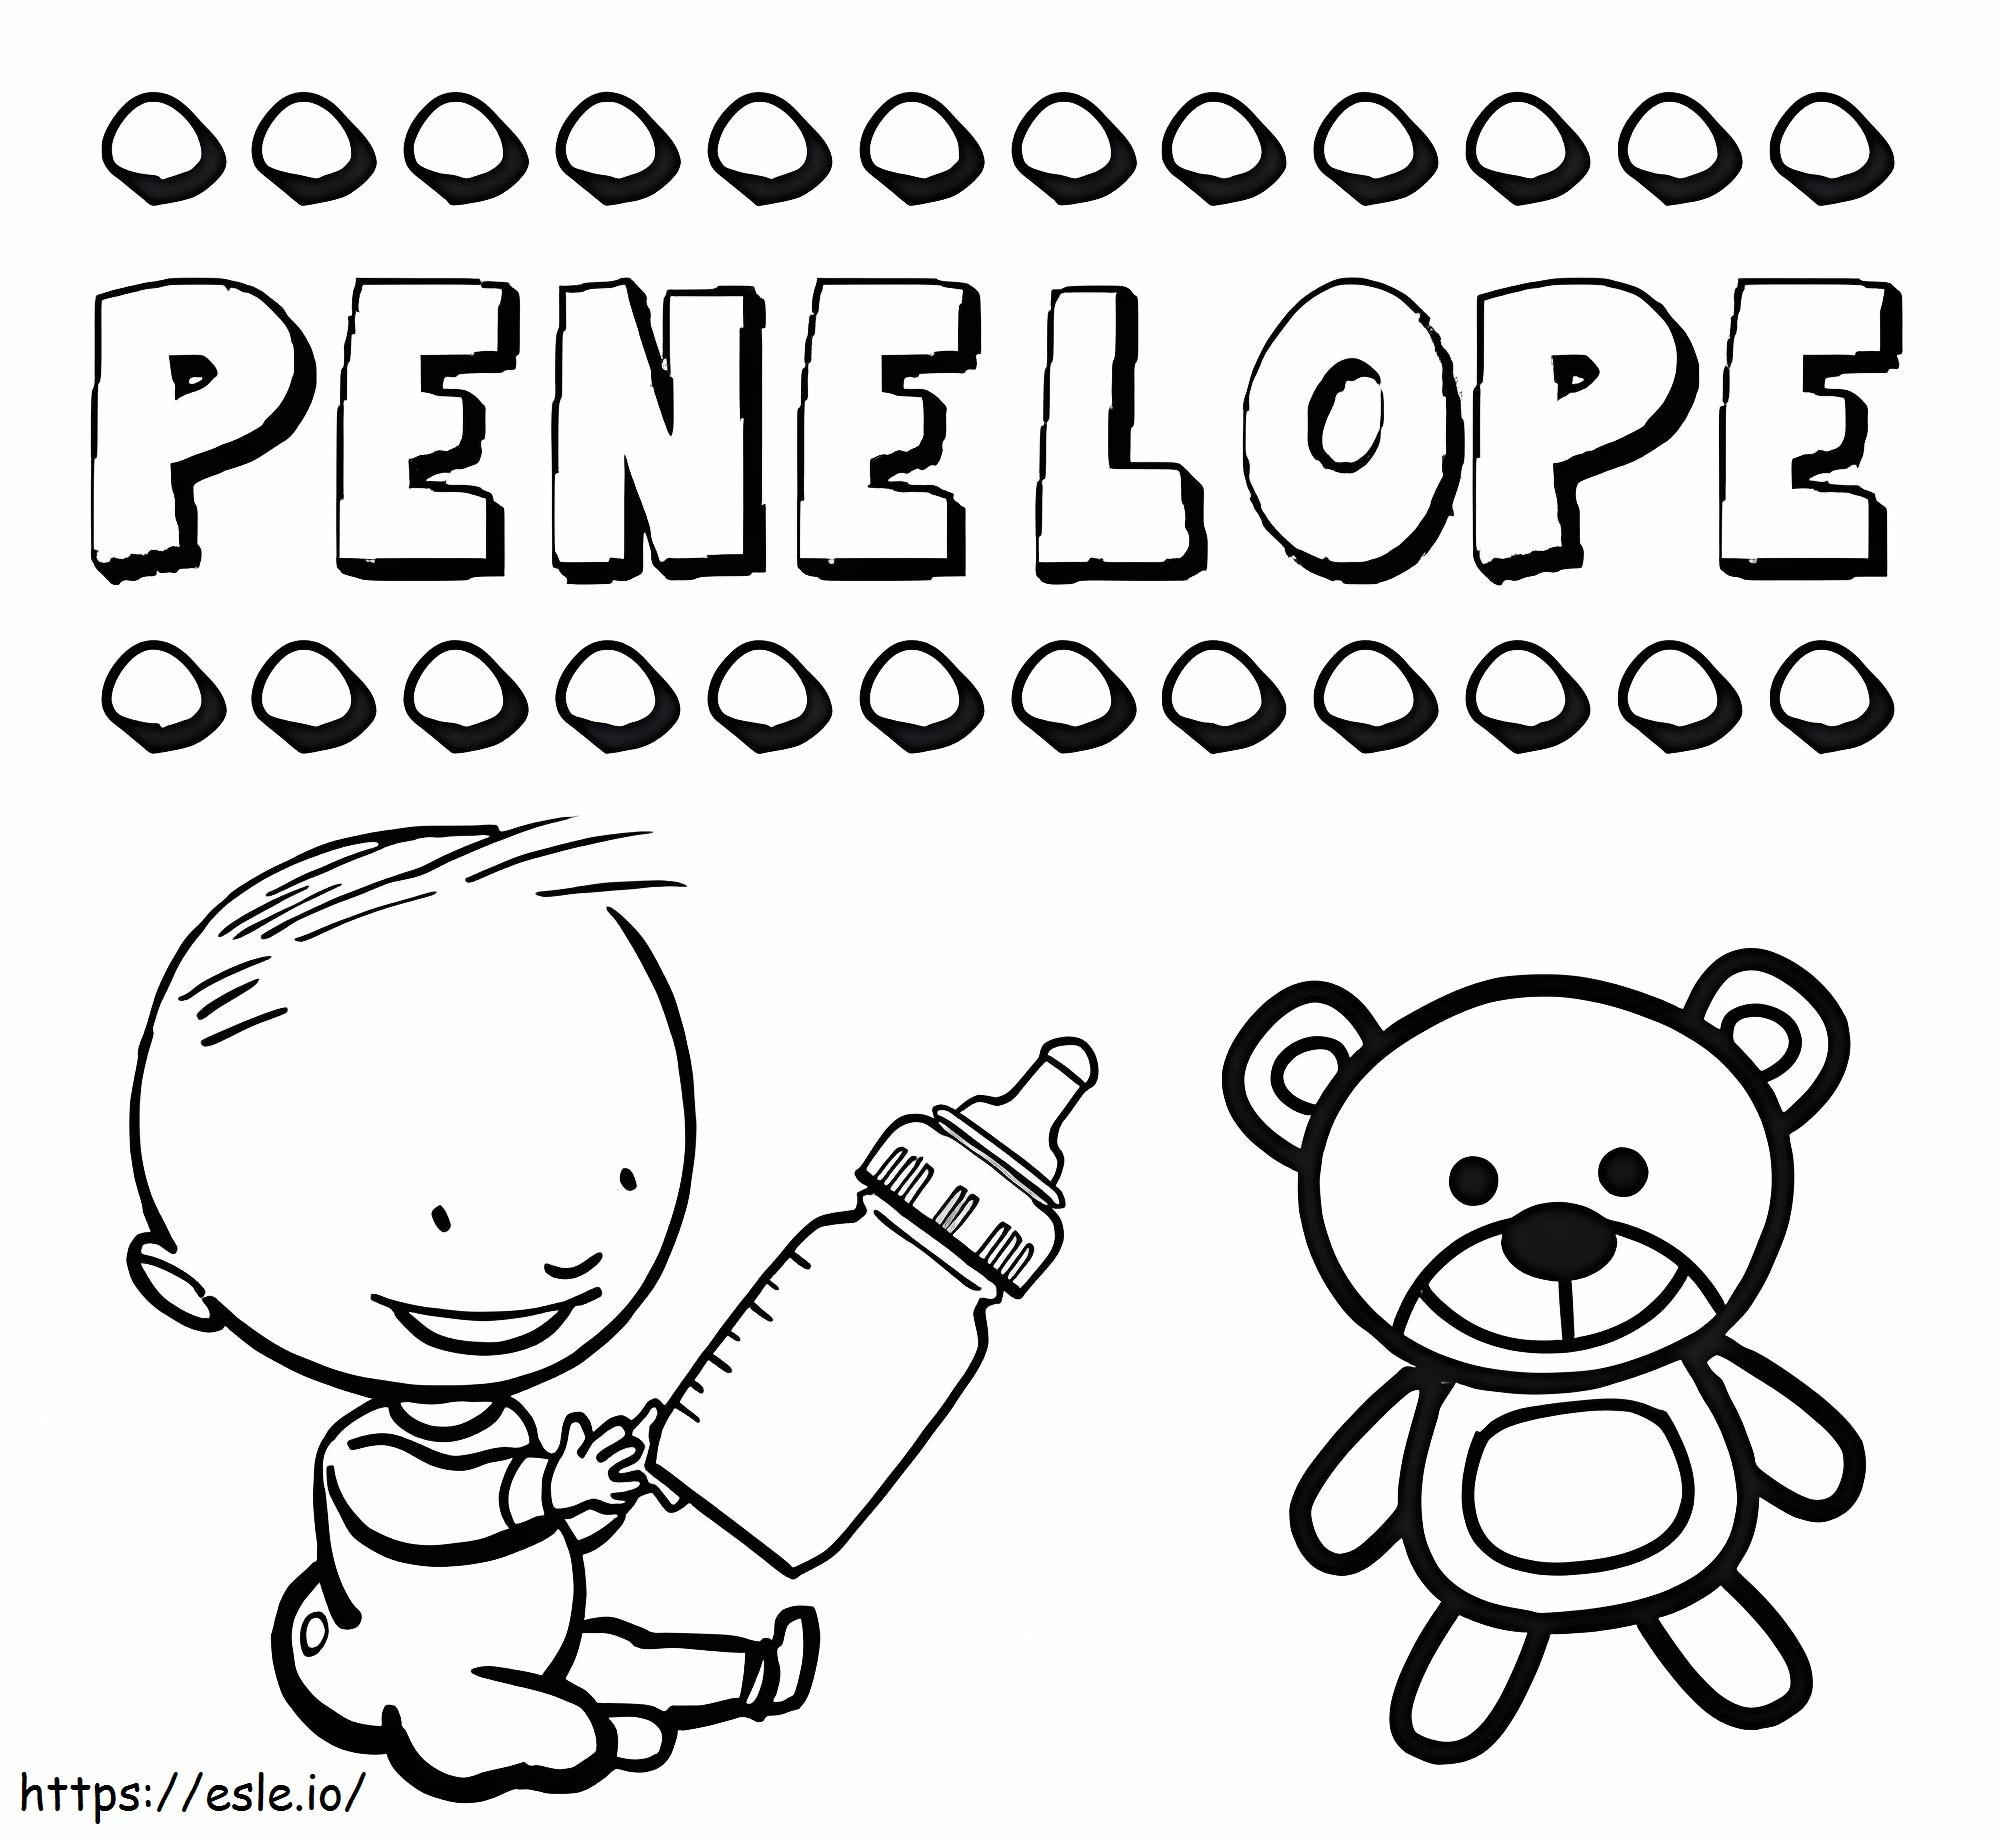 Penelope Printable coloring page